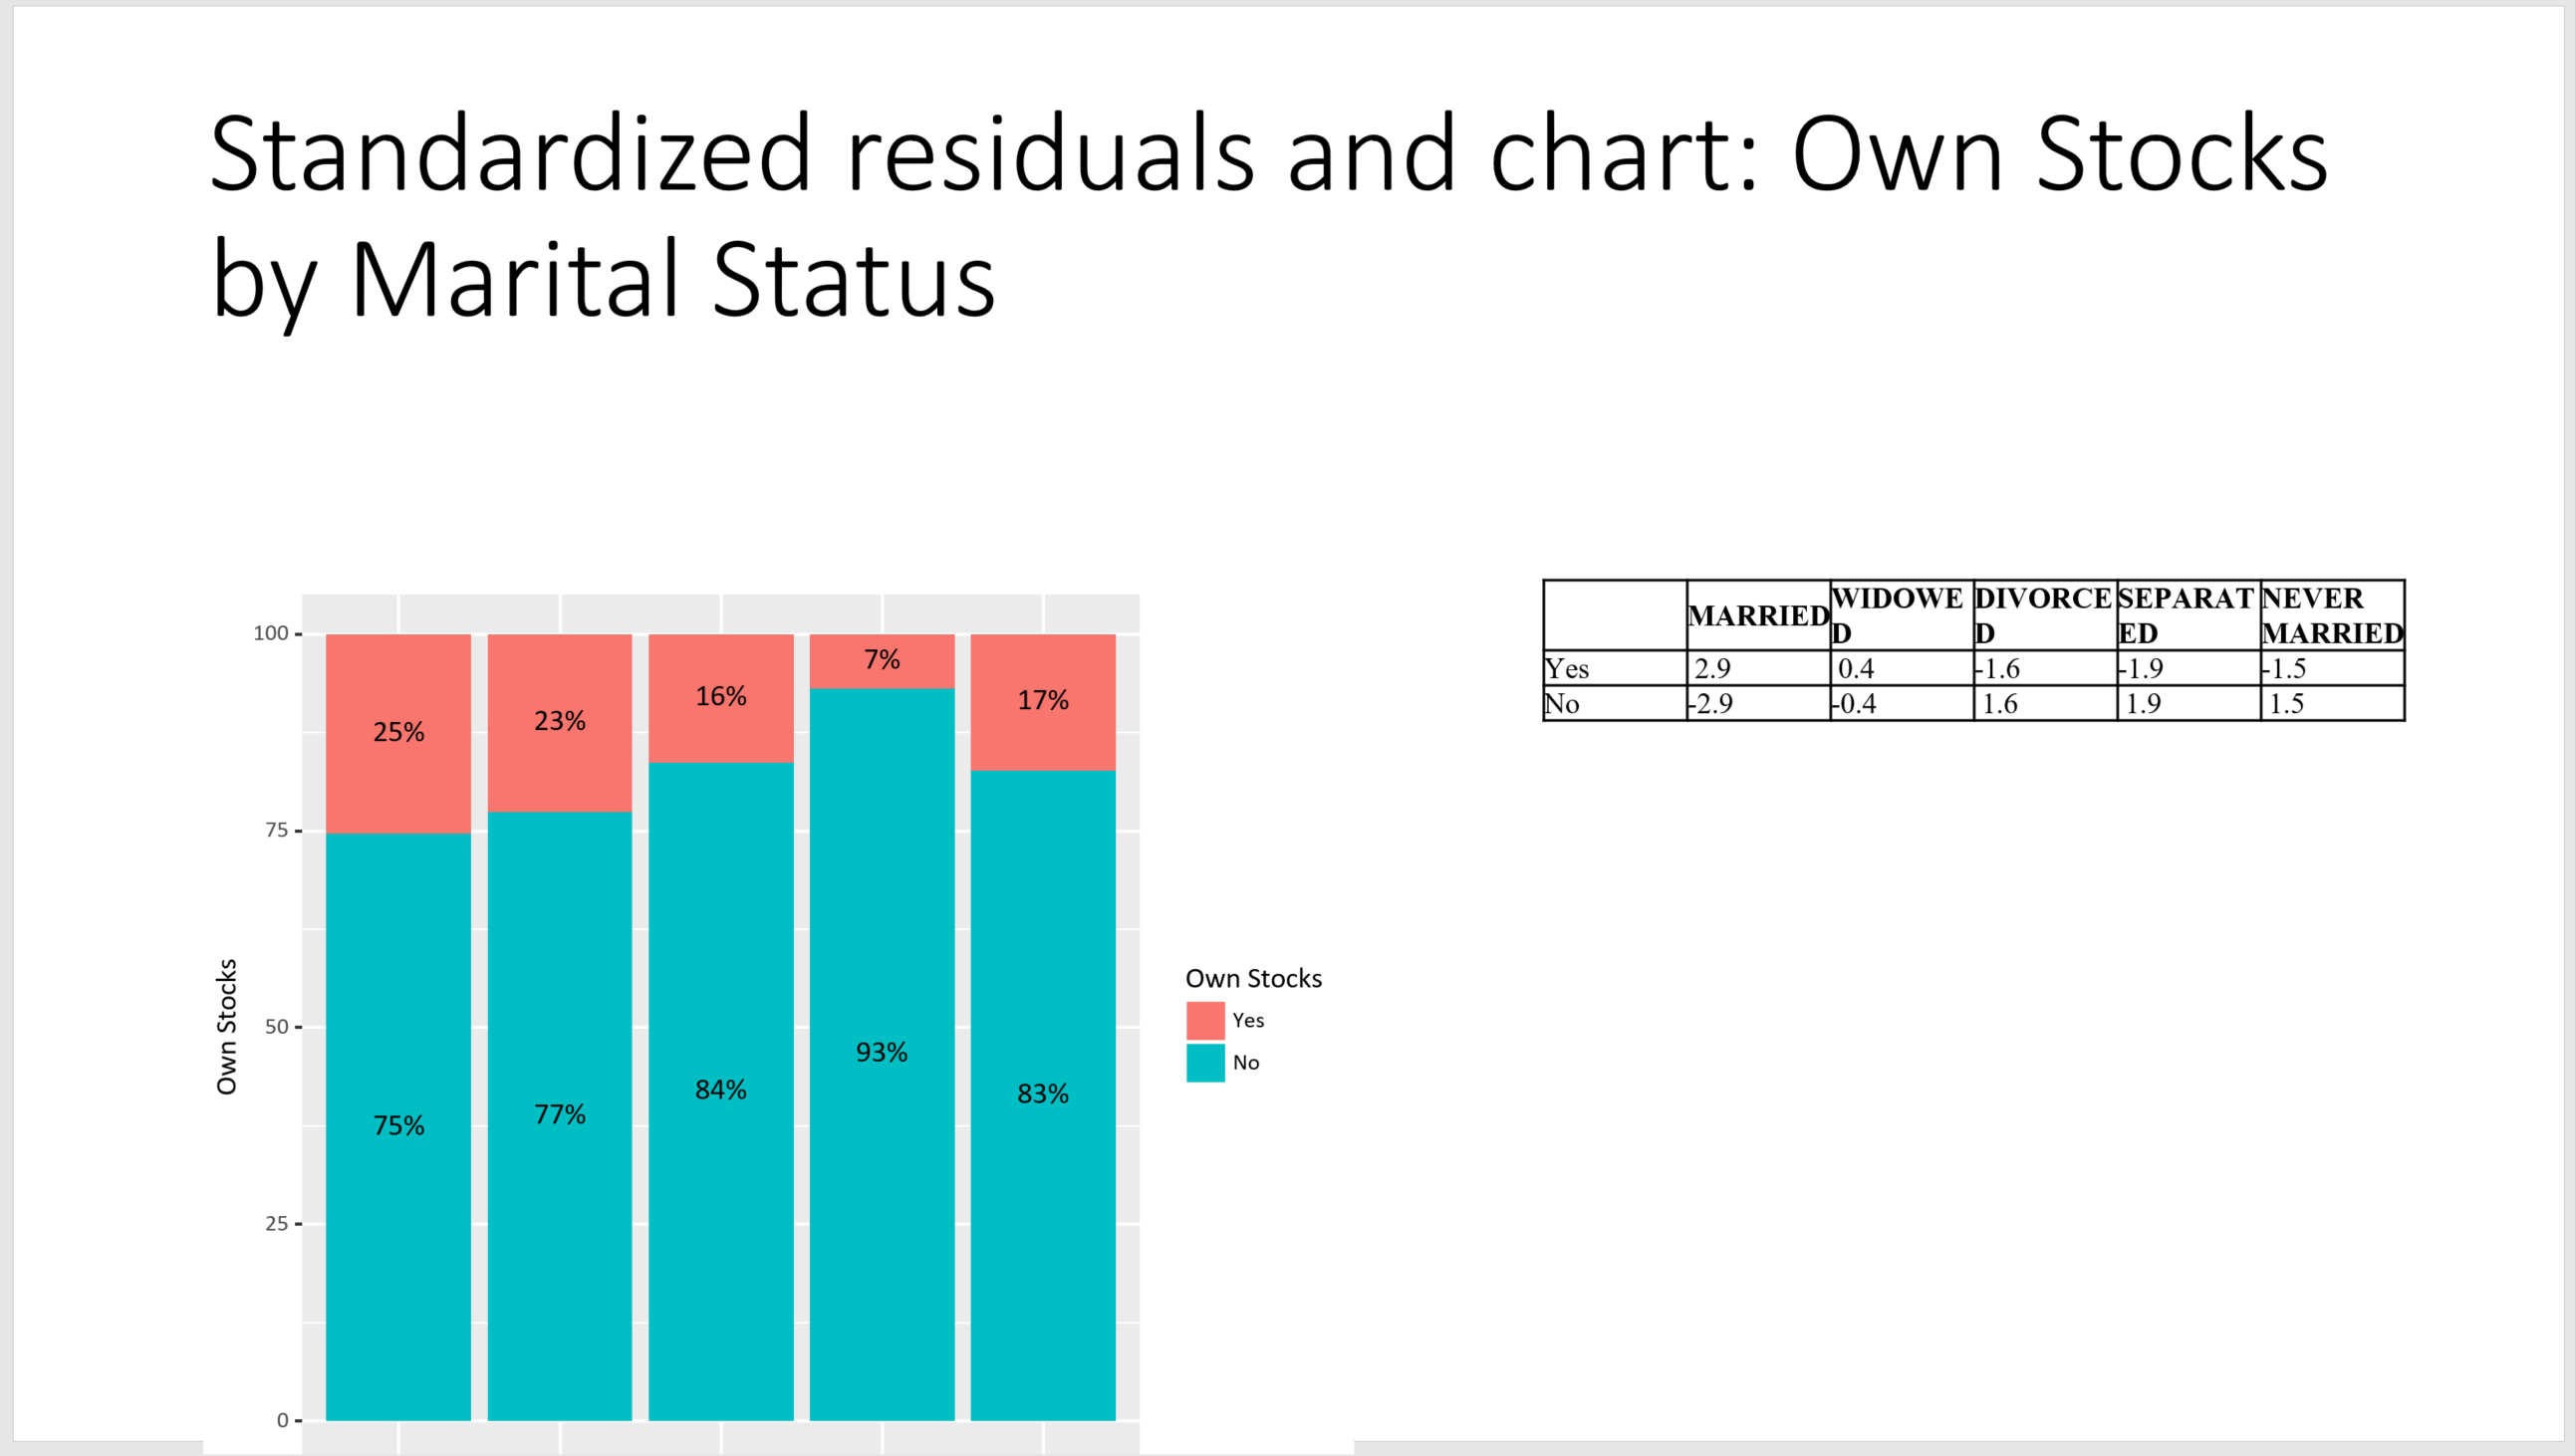 Chart created in PowerPoint using R